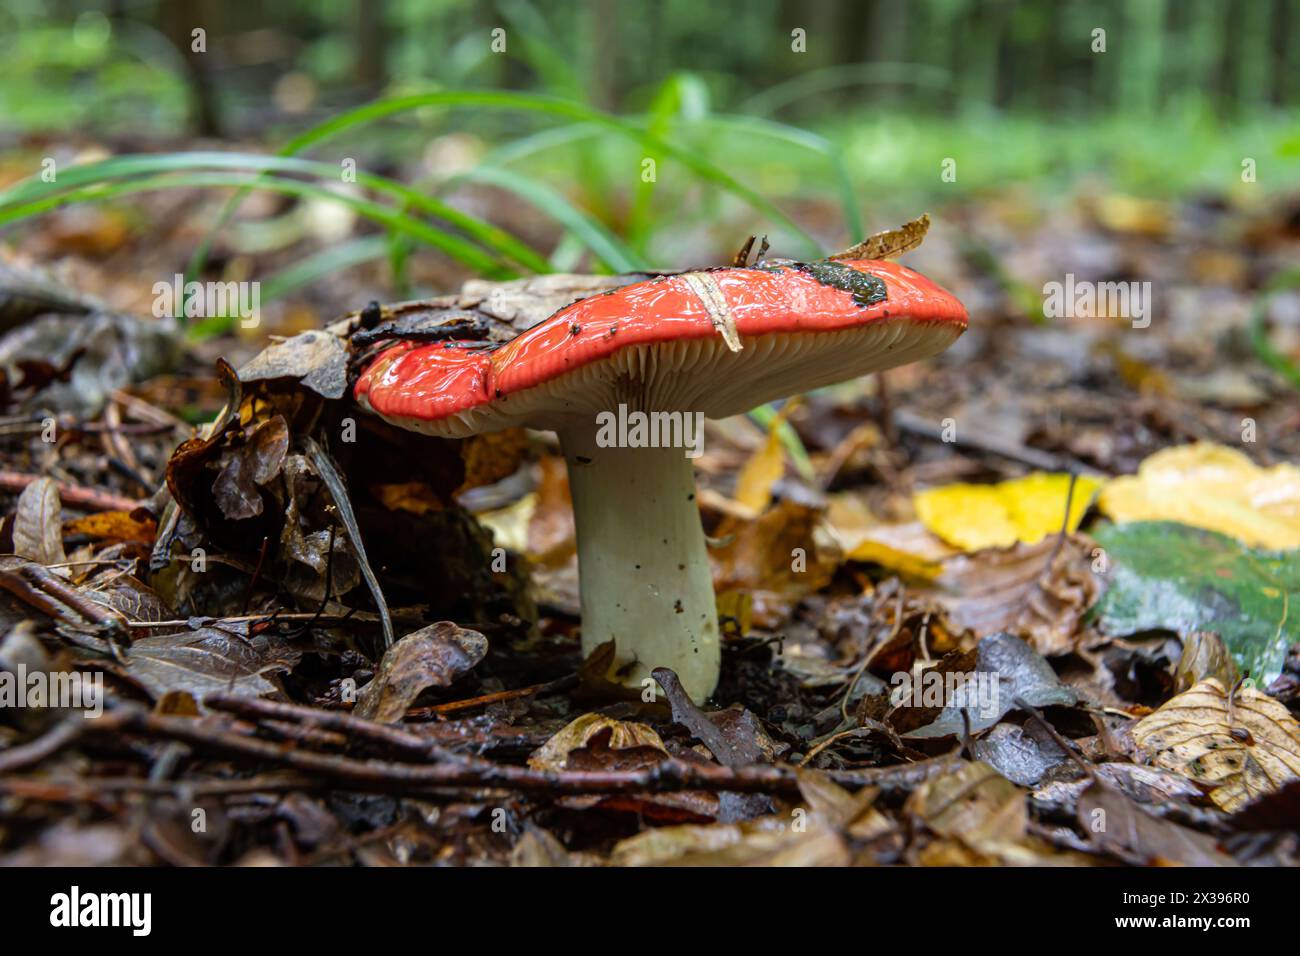 Russula xerampelina, also known as the crab brittlegill or the shrimp mushroom in forest. Stock Photo